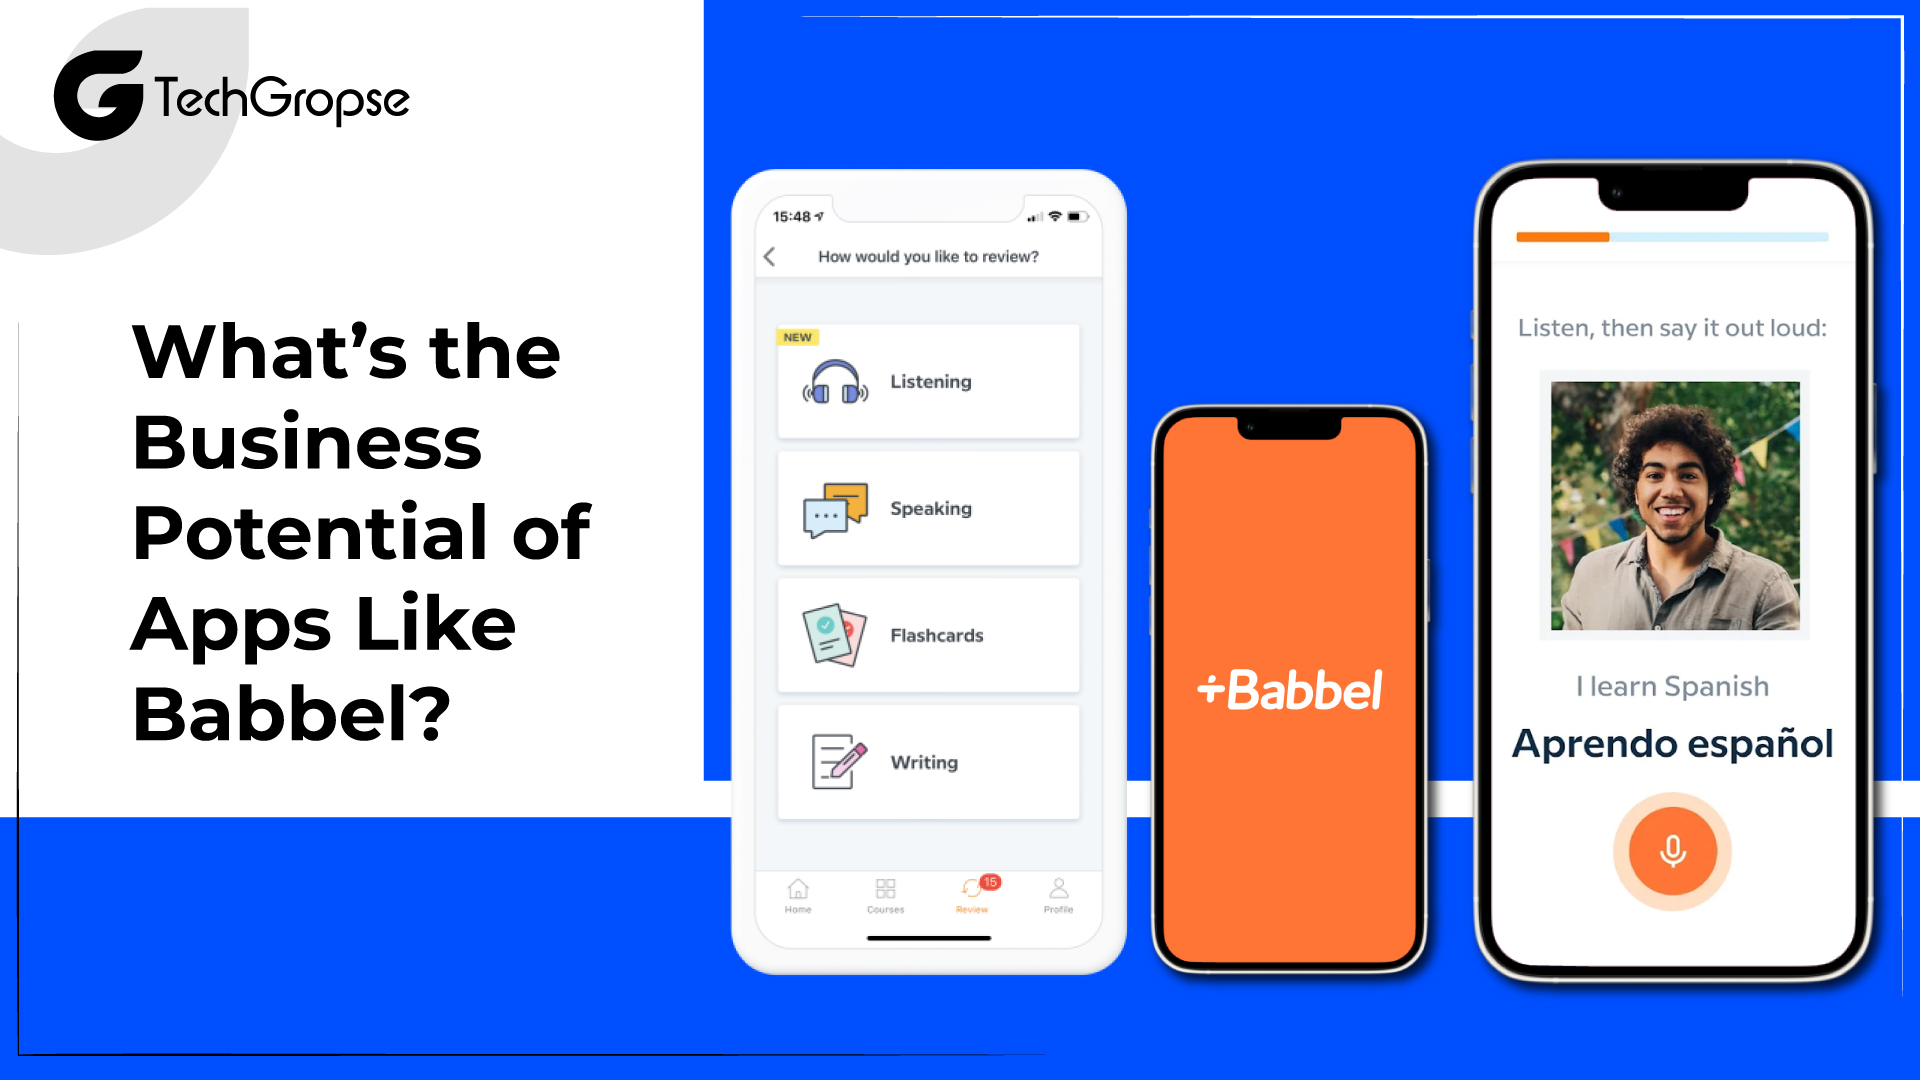  What's the Business Potential of Apps Like Babbel?